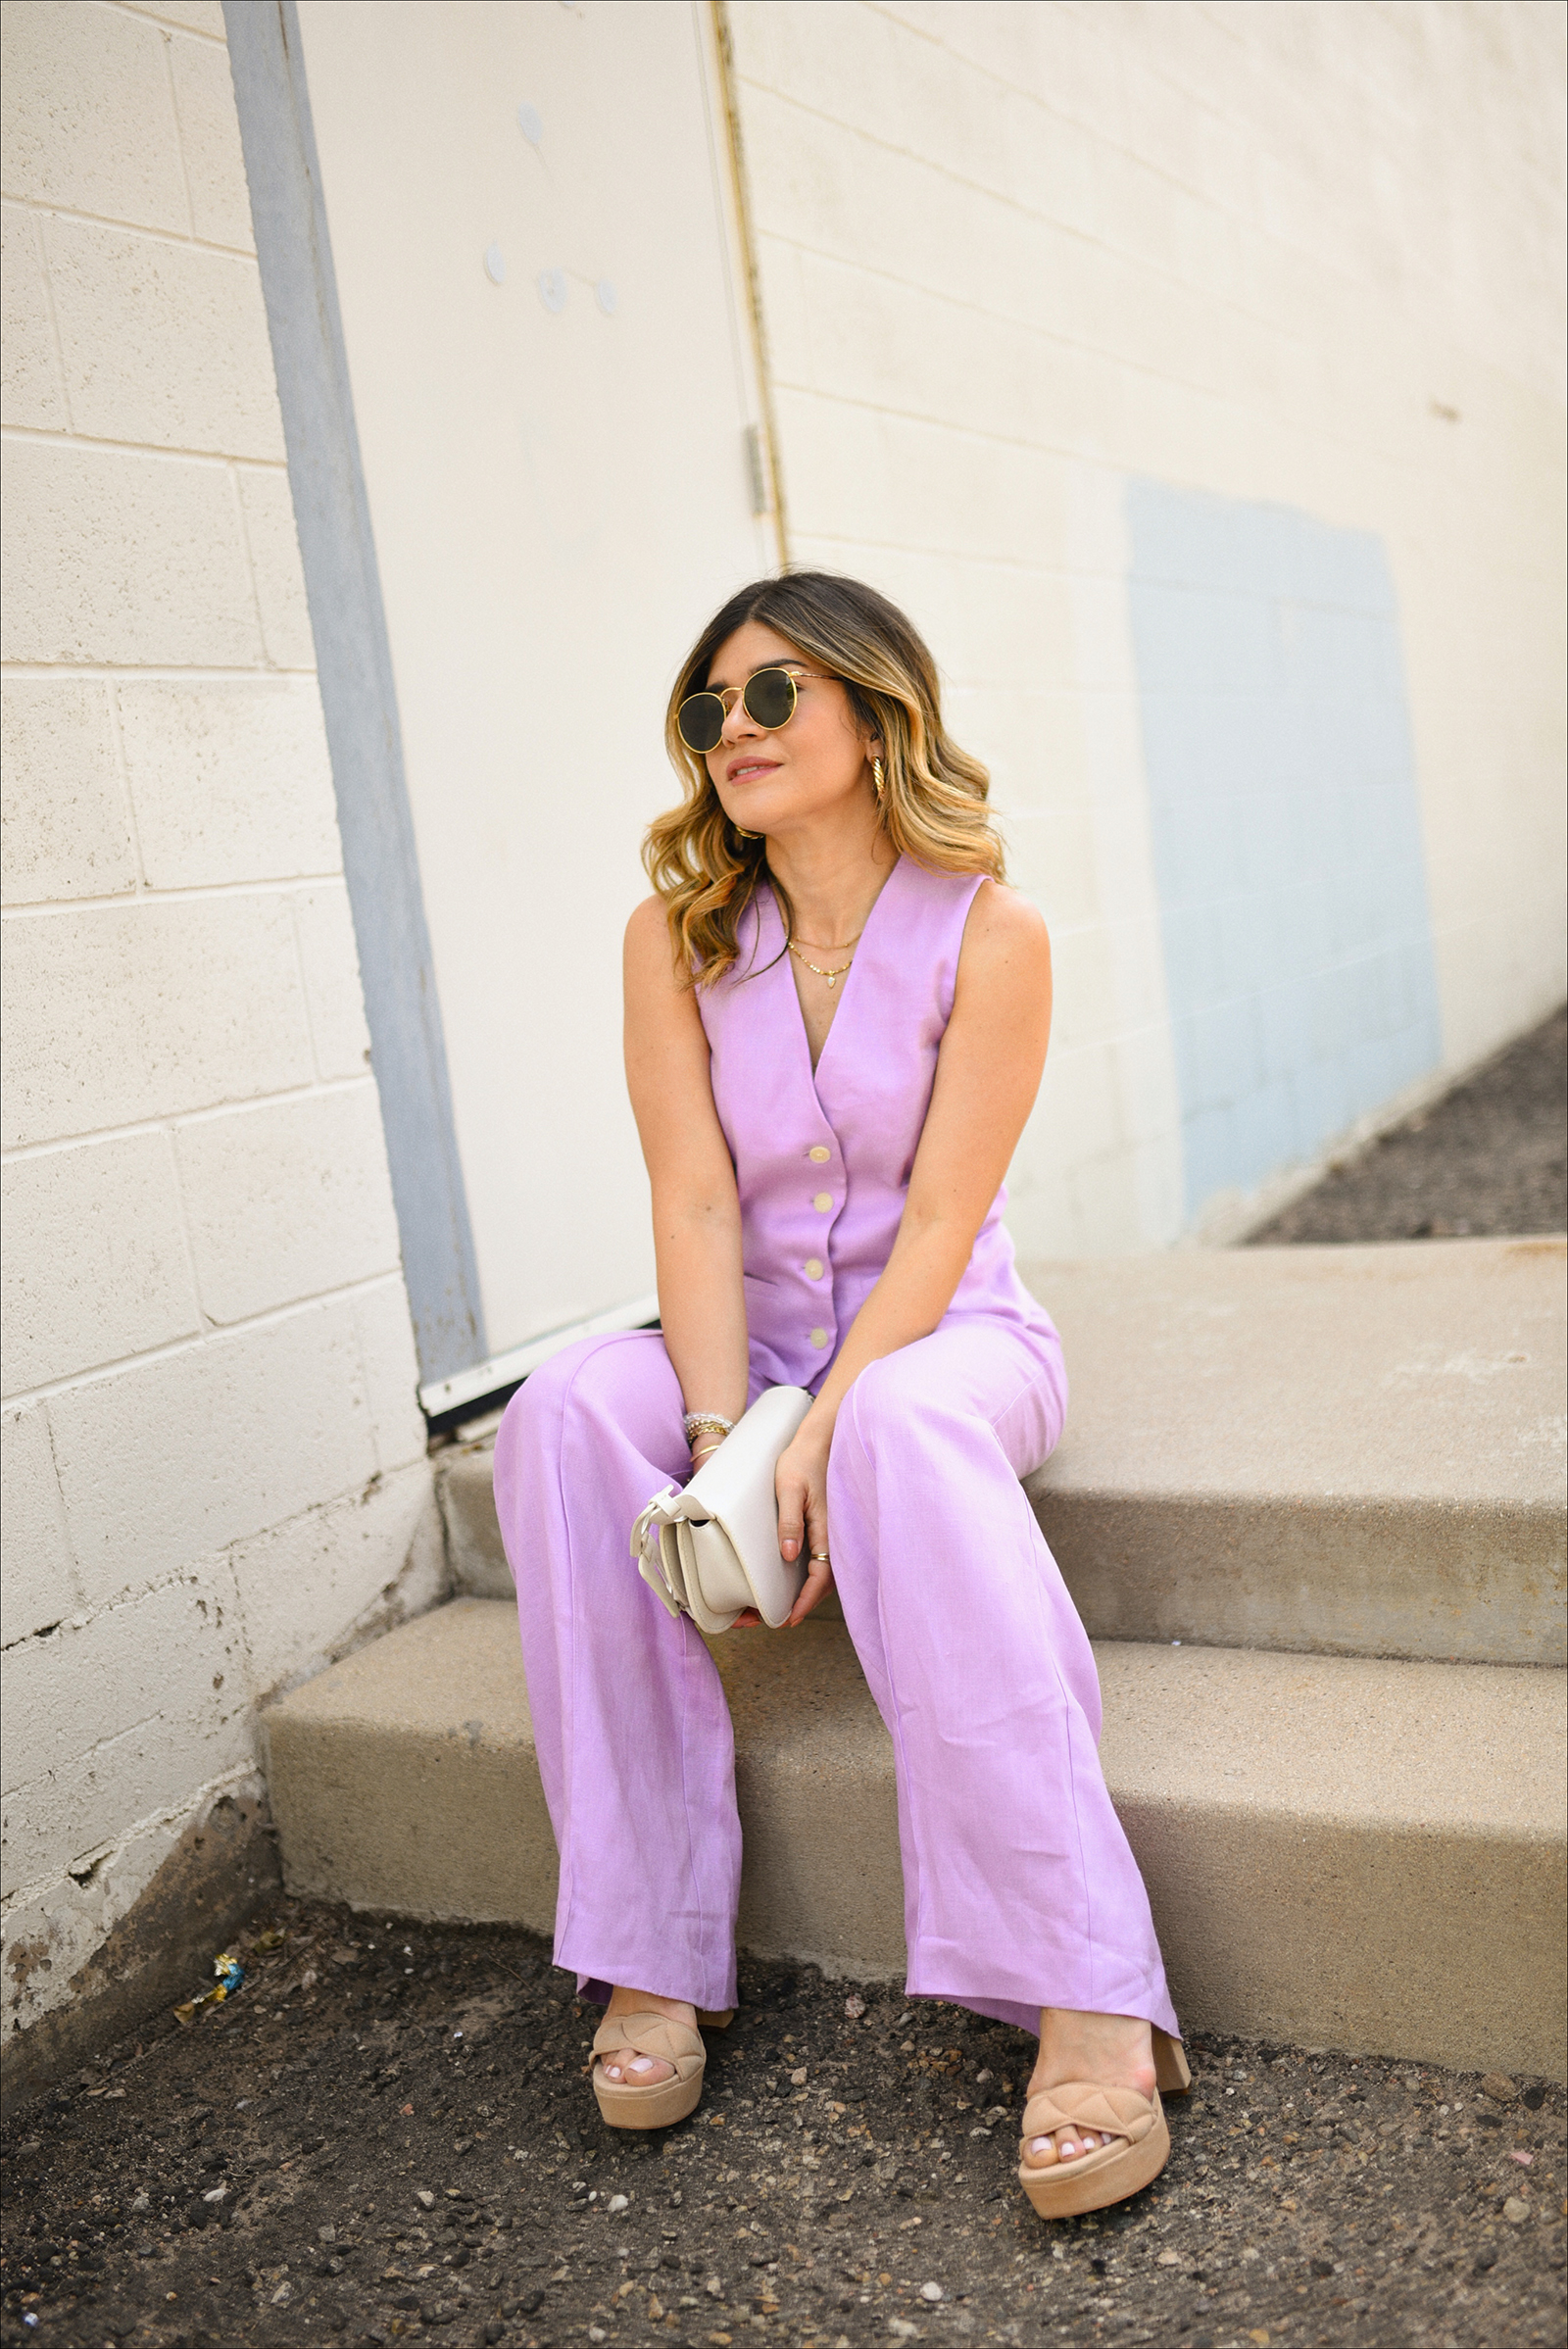 Carolina Hellal of Chic Talk wearing a pink linen set from Mango, Melie Bianco white shoulder bag, Vince Camuto nude sandals, and rounded Rayban sunglasses